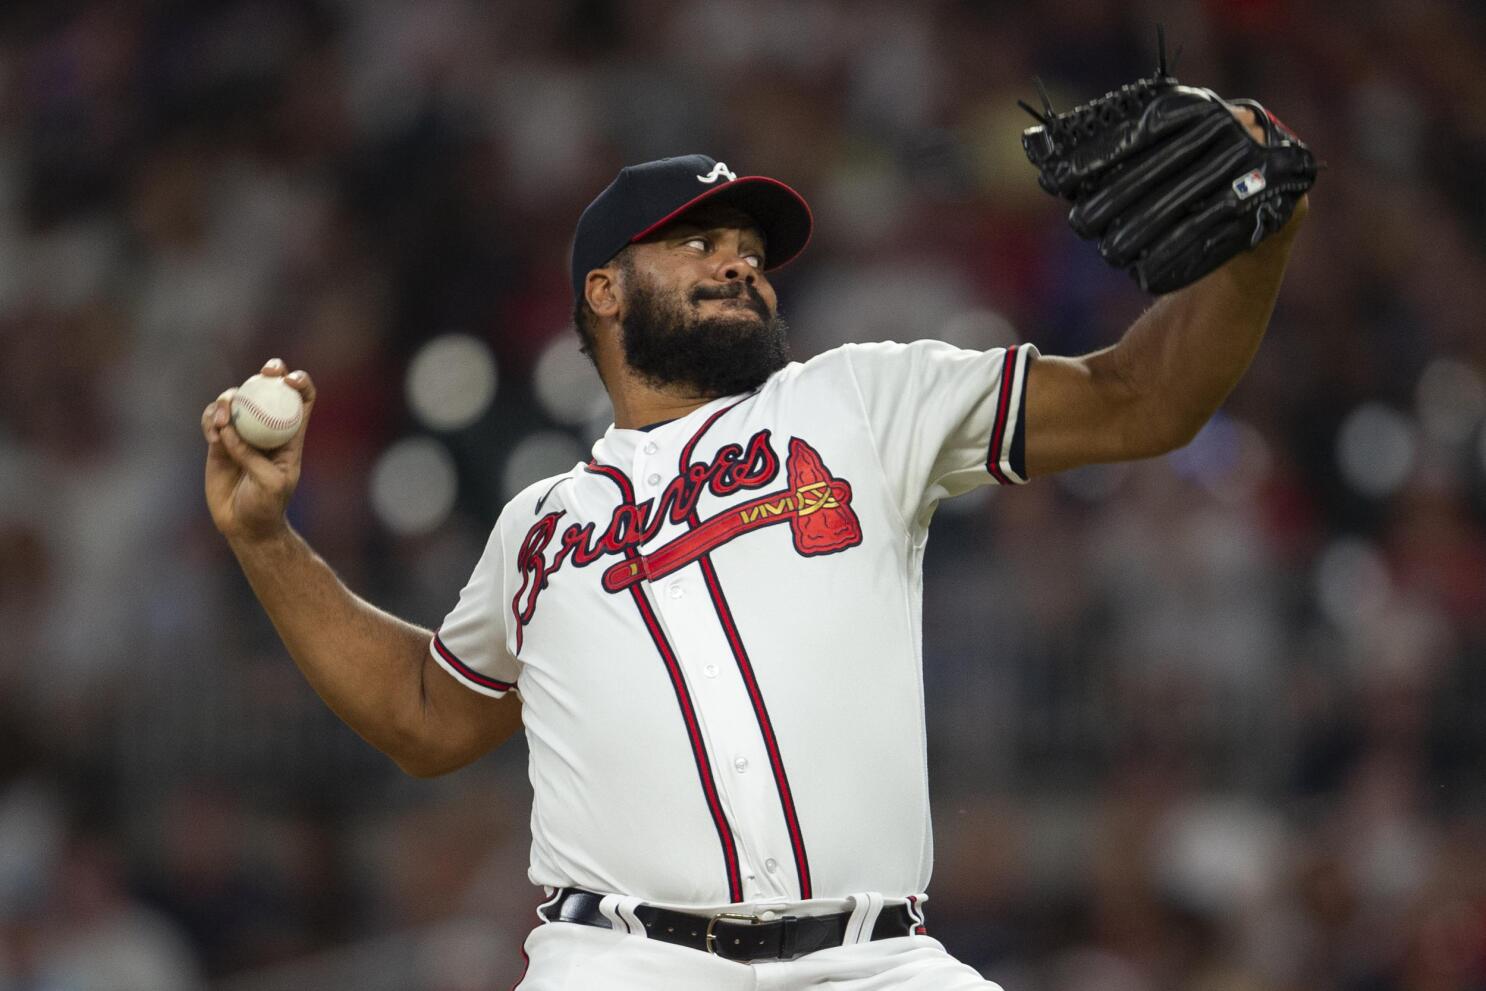 Two pitchers will share Braves' closer's role